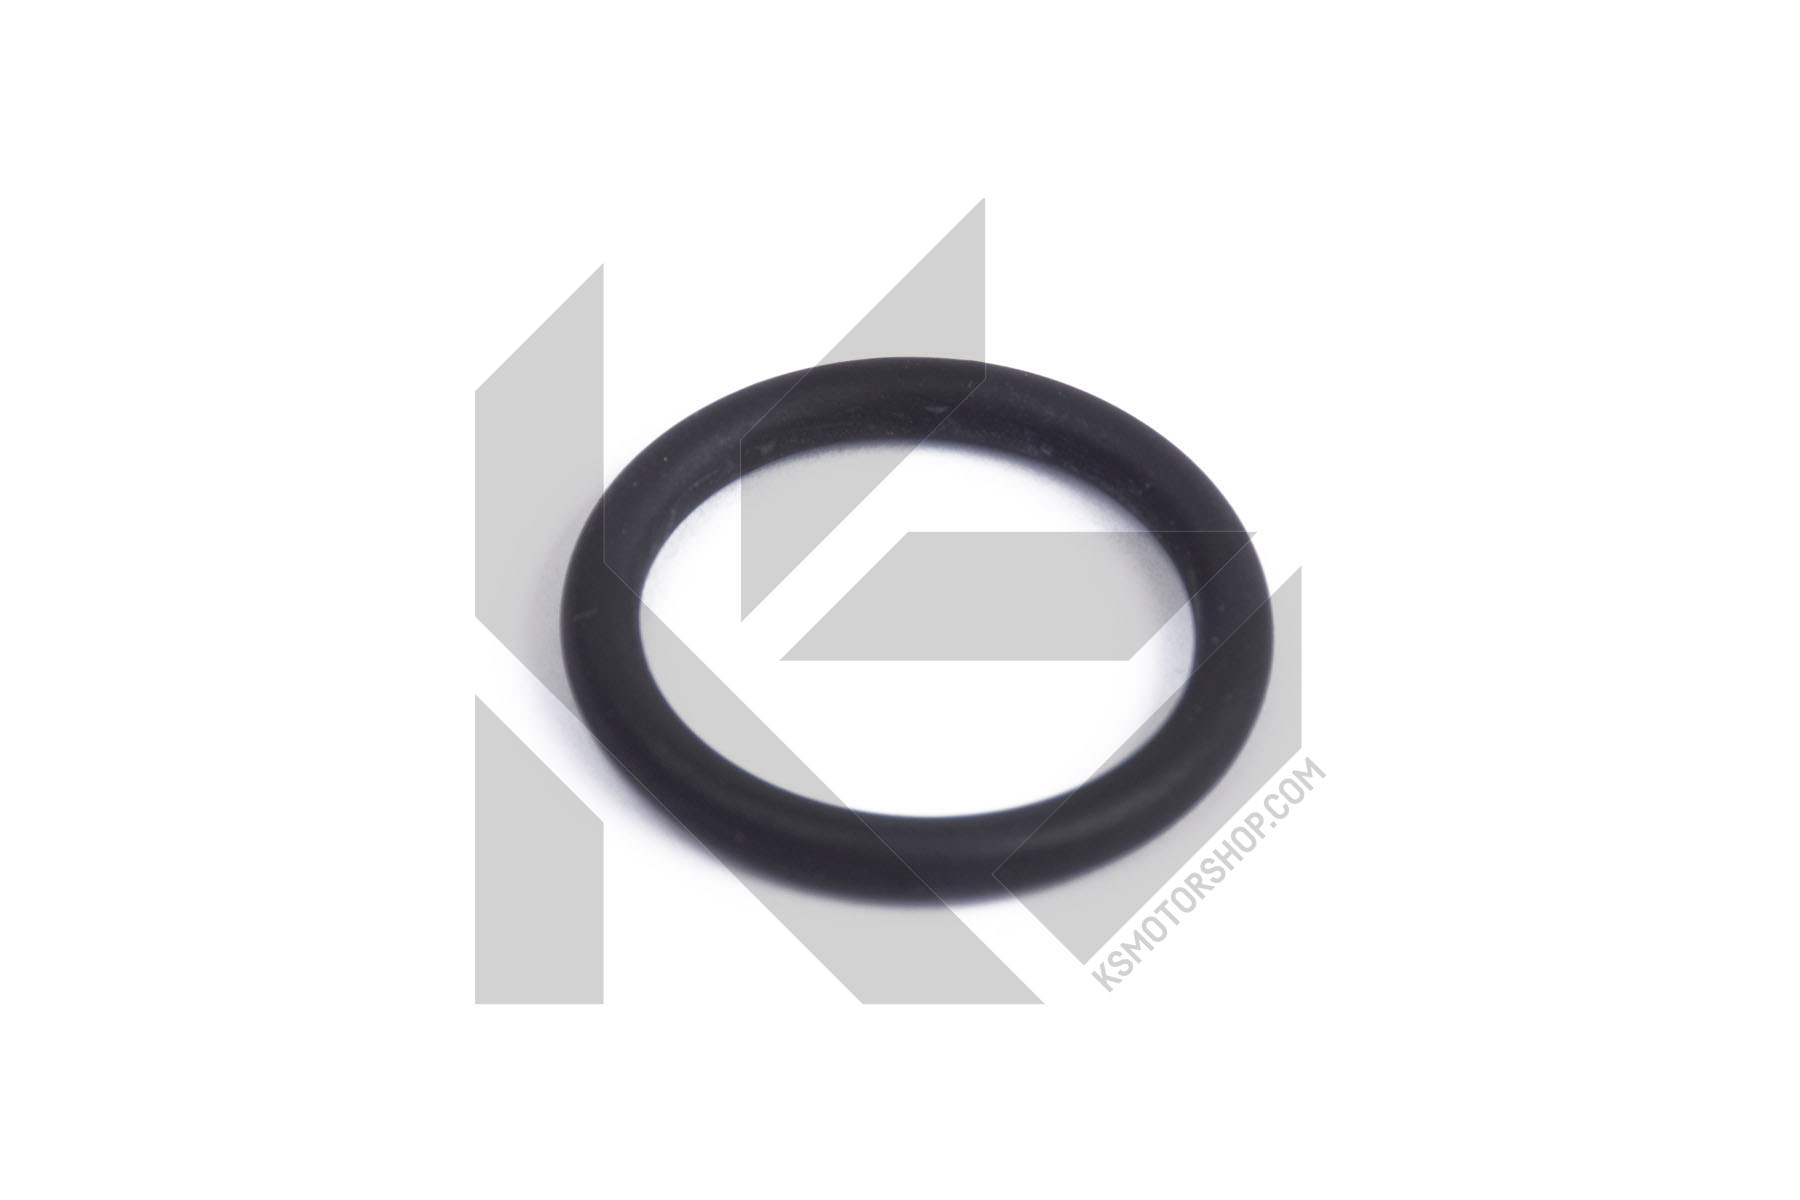 000.230, Seal Ring, O-ring kit, ELRING, 01.10.138, 0179973345, 104678, 4890926, 51.96501-0502, 99610590103, F00RJ01026, 0219976248, 51.96501-0699, 5419970545, 51965010502, A0179973345, A419970545, A5419970545